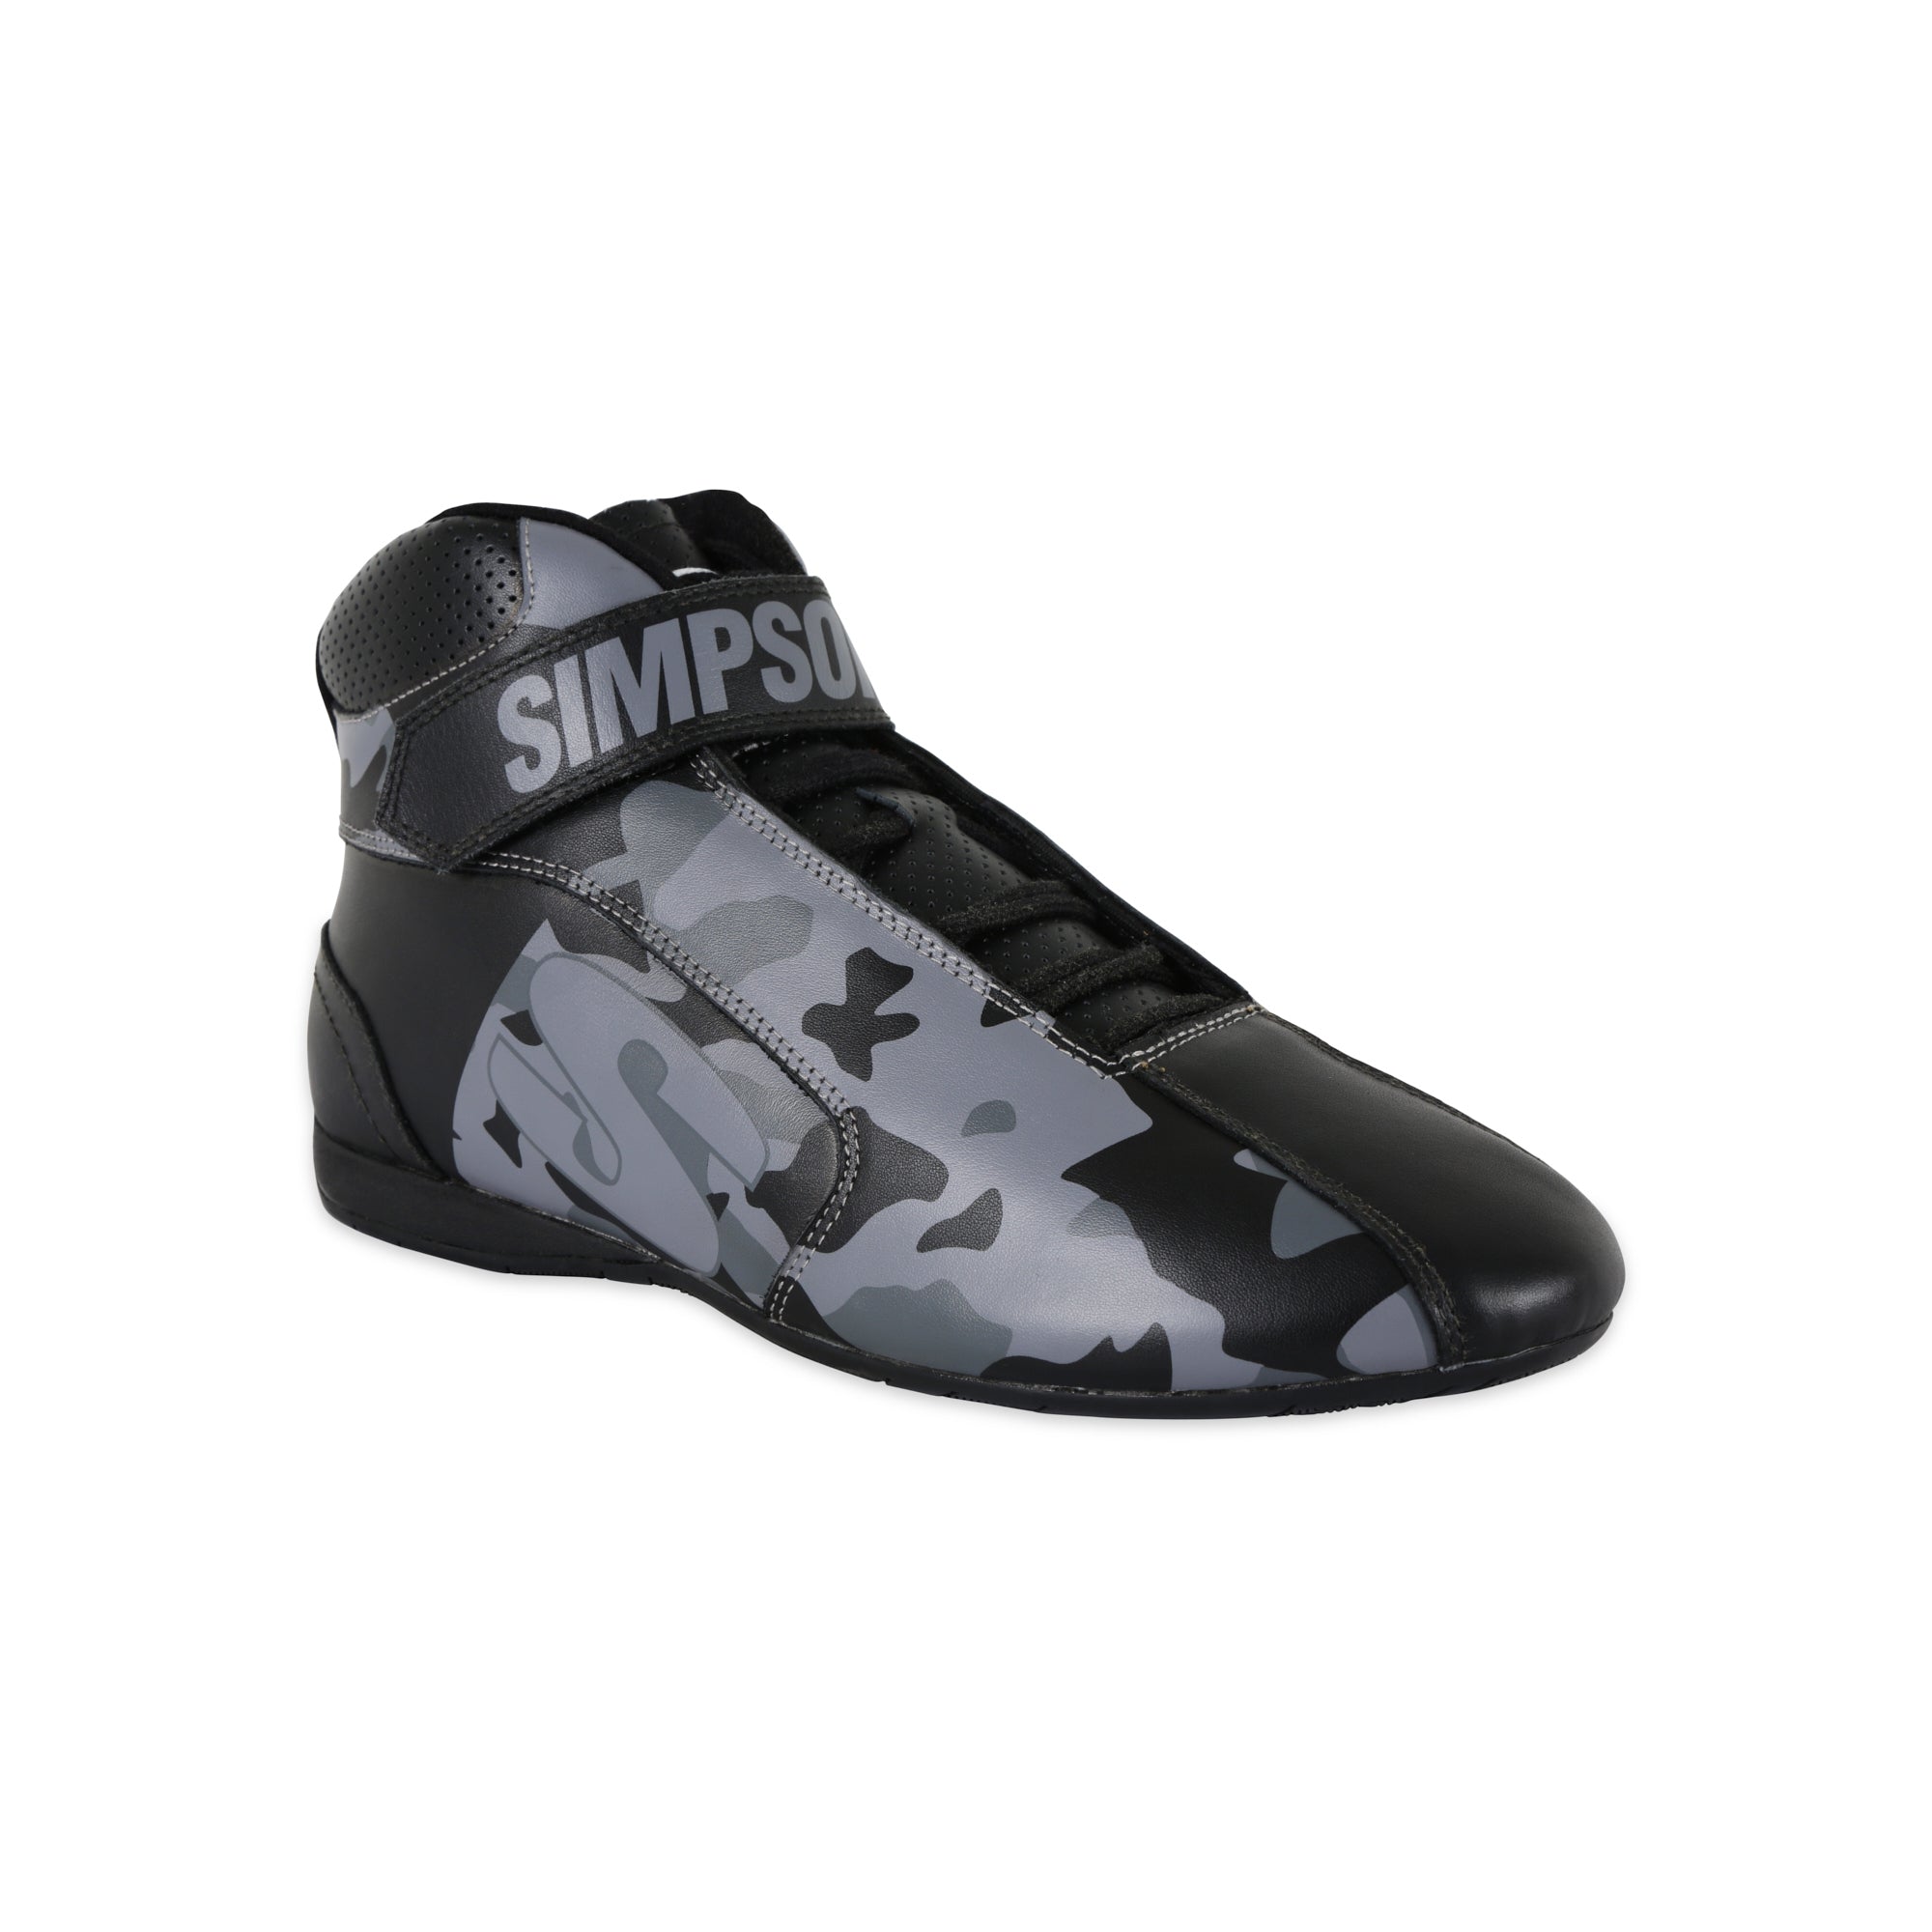 Simpson Shoe DNA X2 Blackout Size 11.5 Safety Clothing Driving Shoes and Boots main image